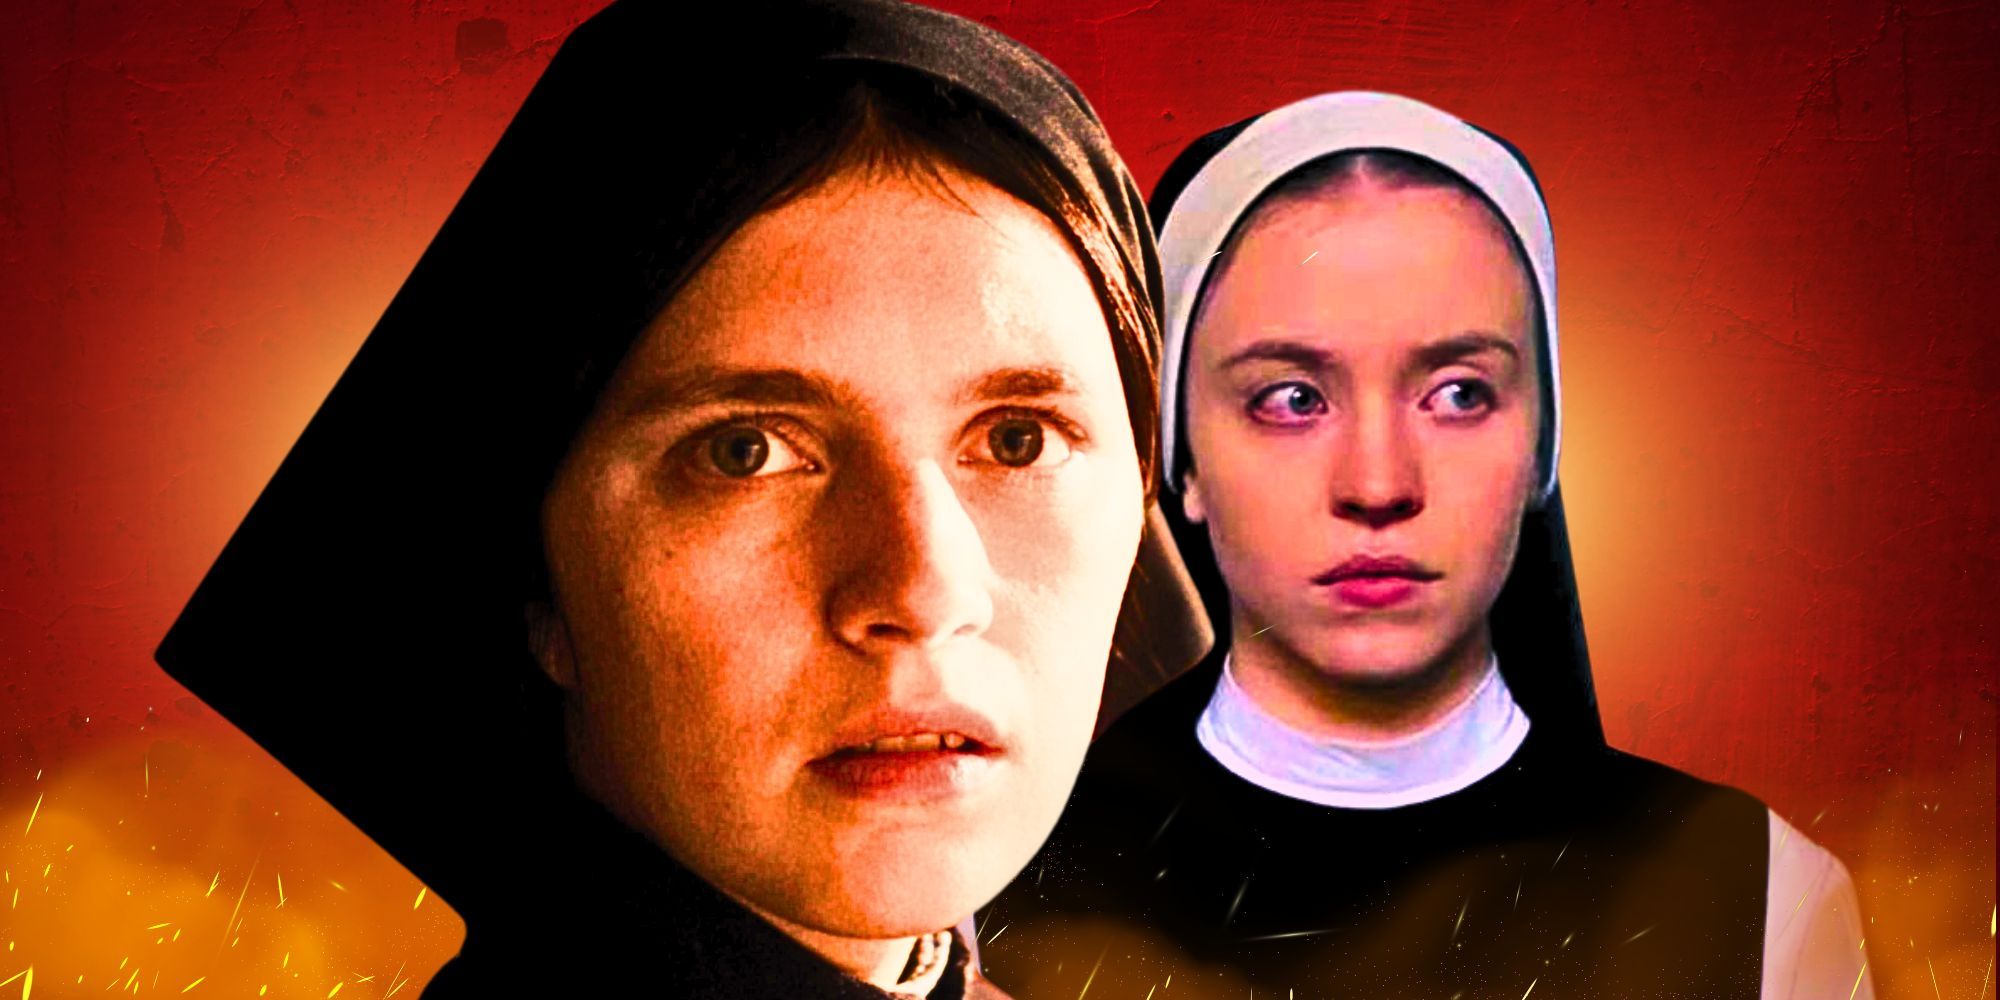 Nell Tiger Free as Sister Margaret in The First Omen and Sydney Sweeney as Sister Cecelia in immaculate